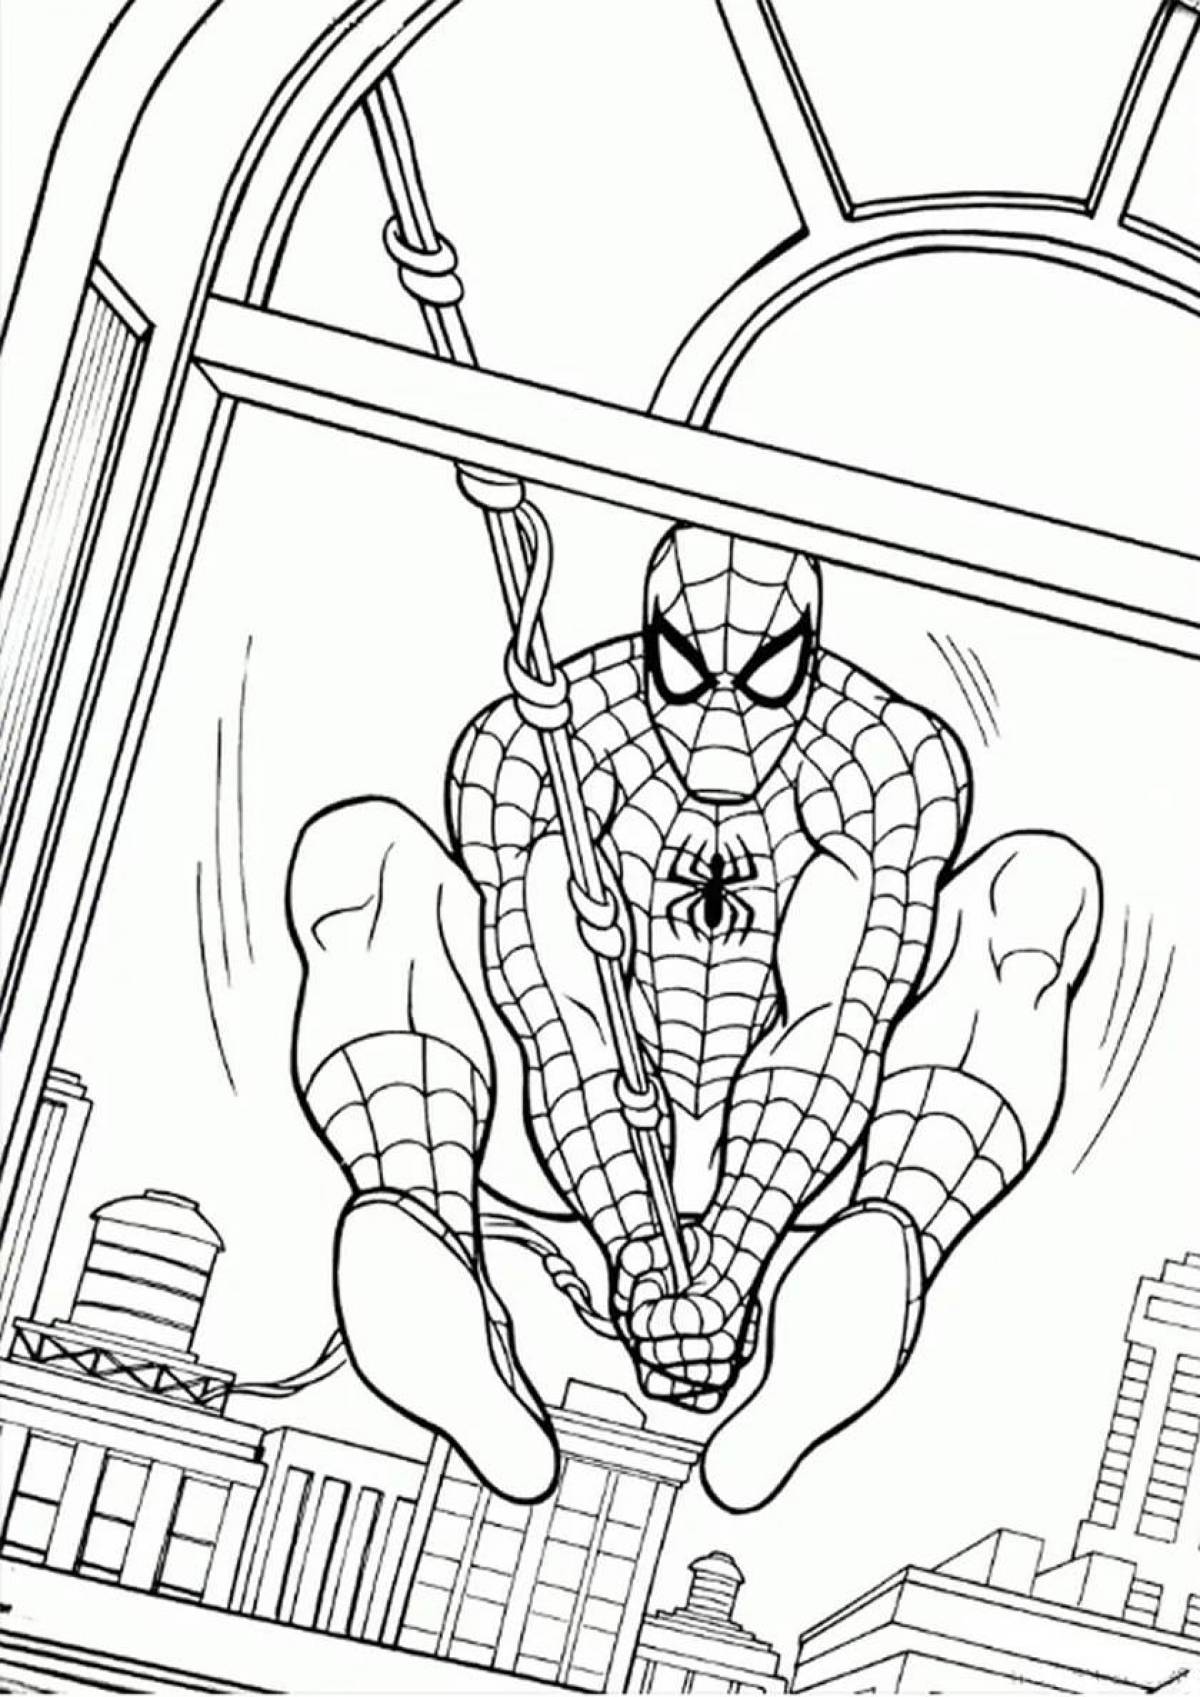 Witty Spider-Man coloring pages for boys